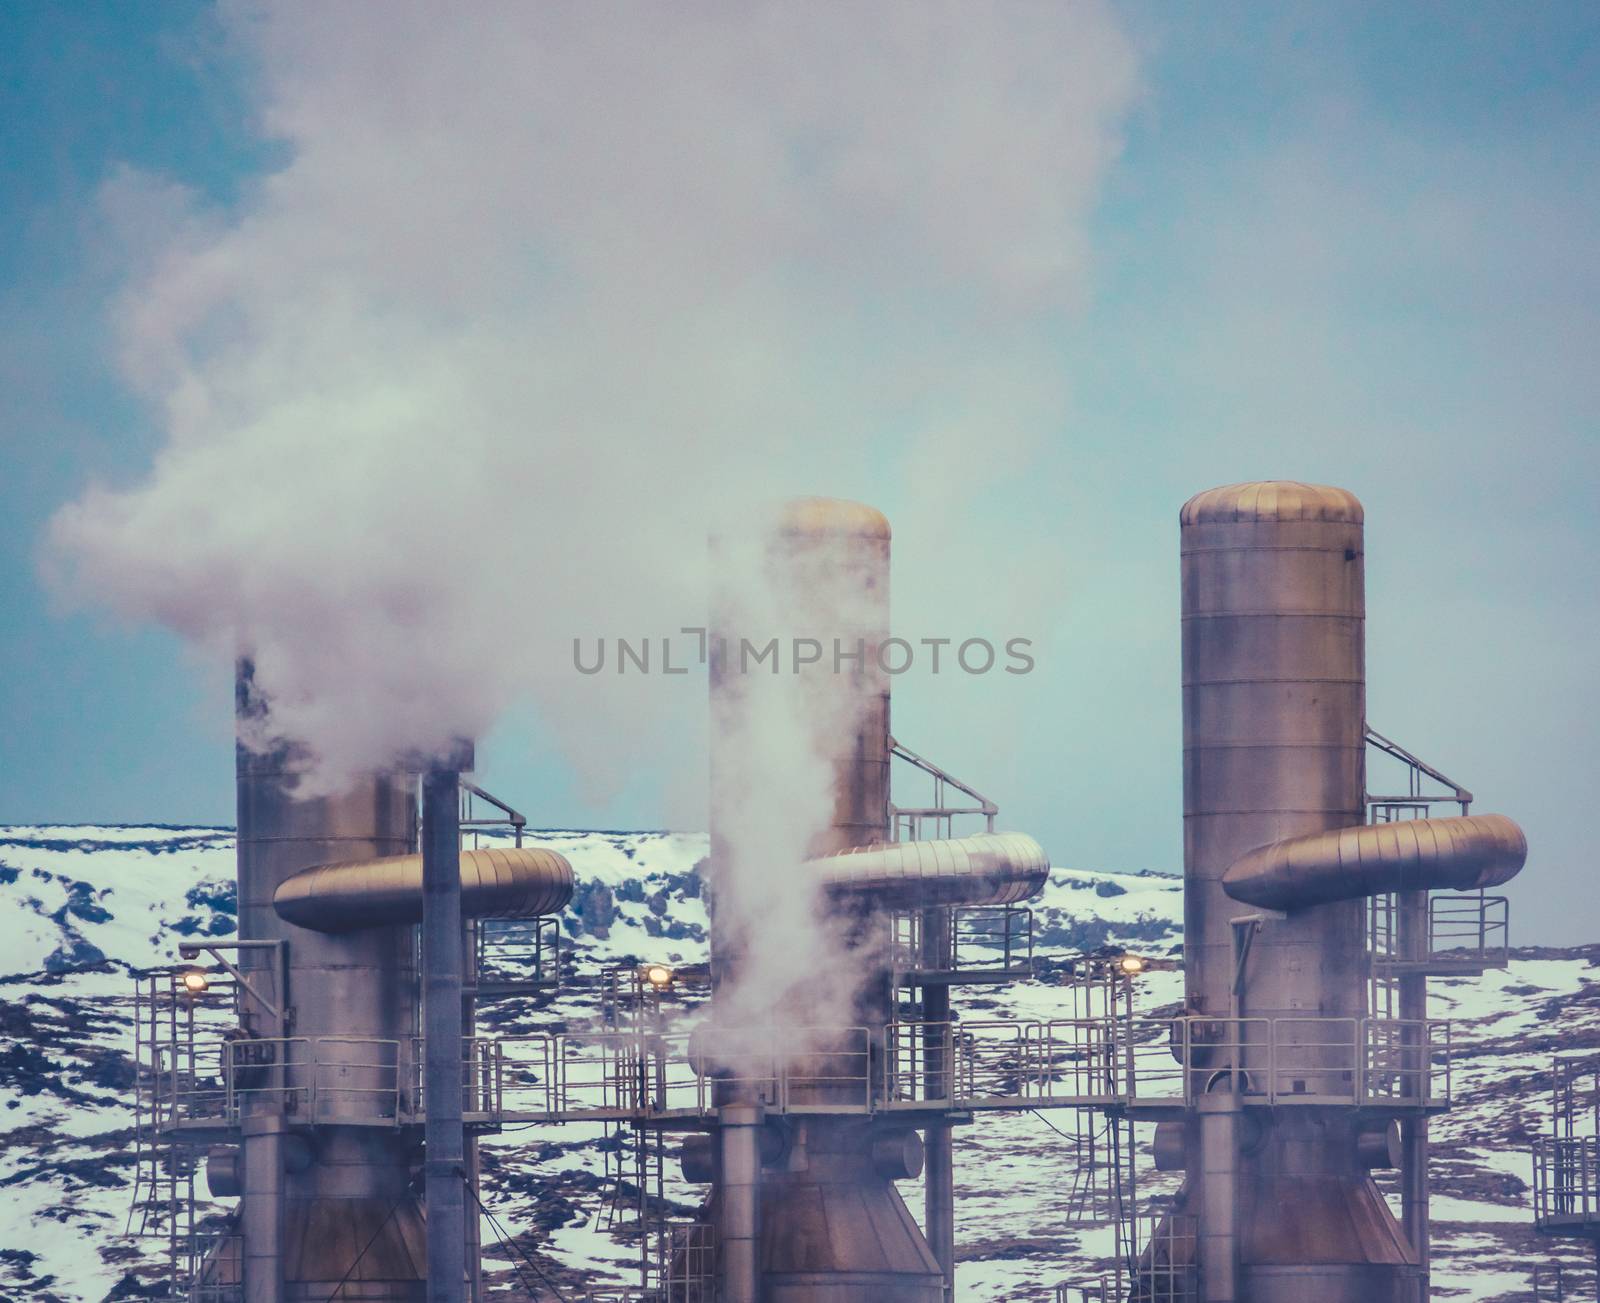 A Geothermal Power Generation In Iceland